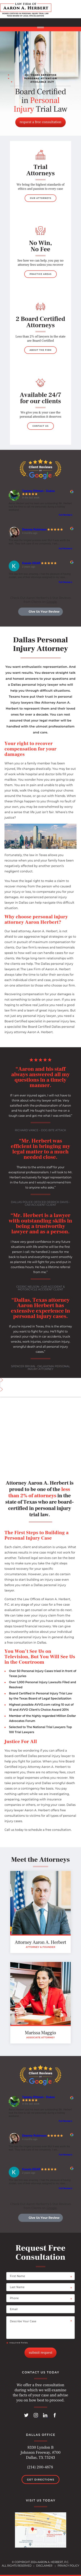 The Law Firm of Aaron A Herbert - Dallas TX Lawyers